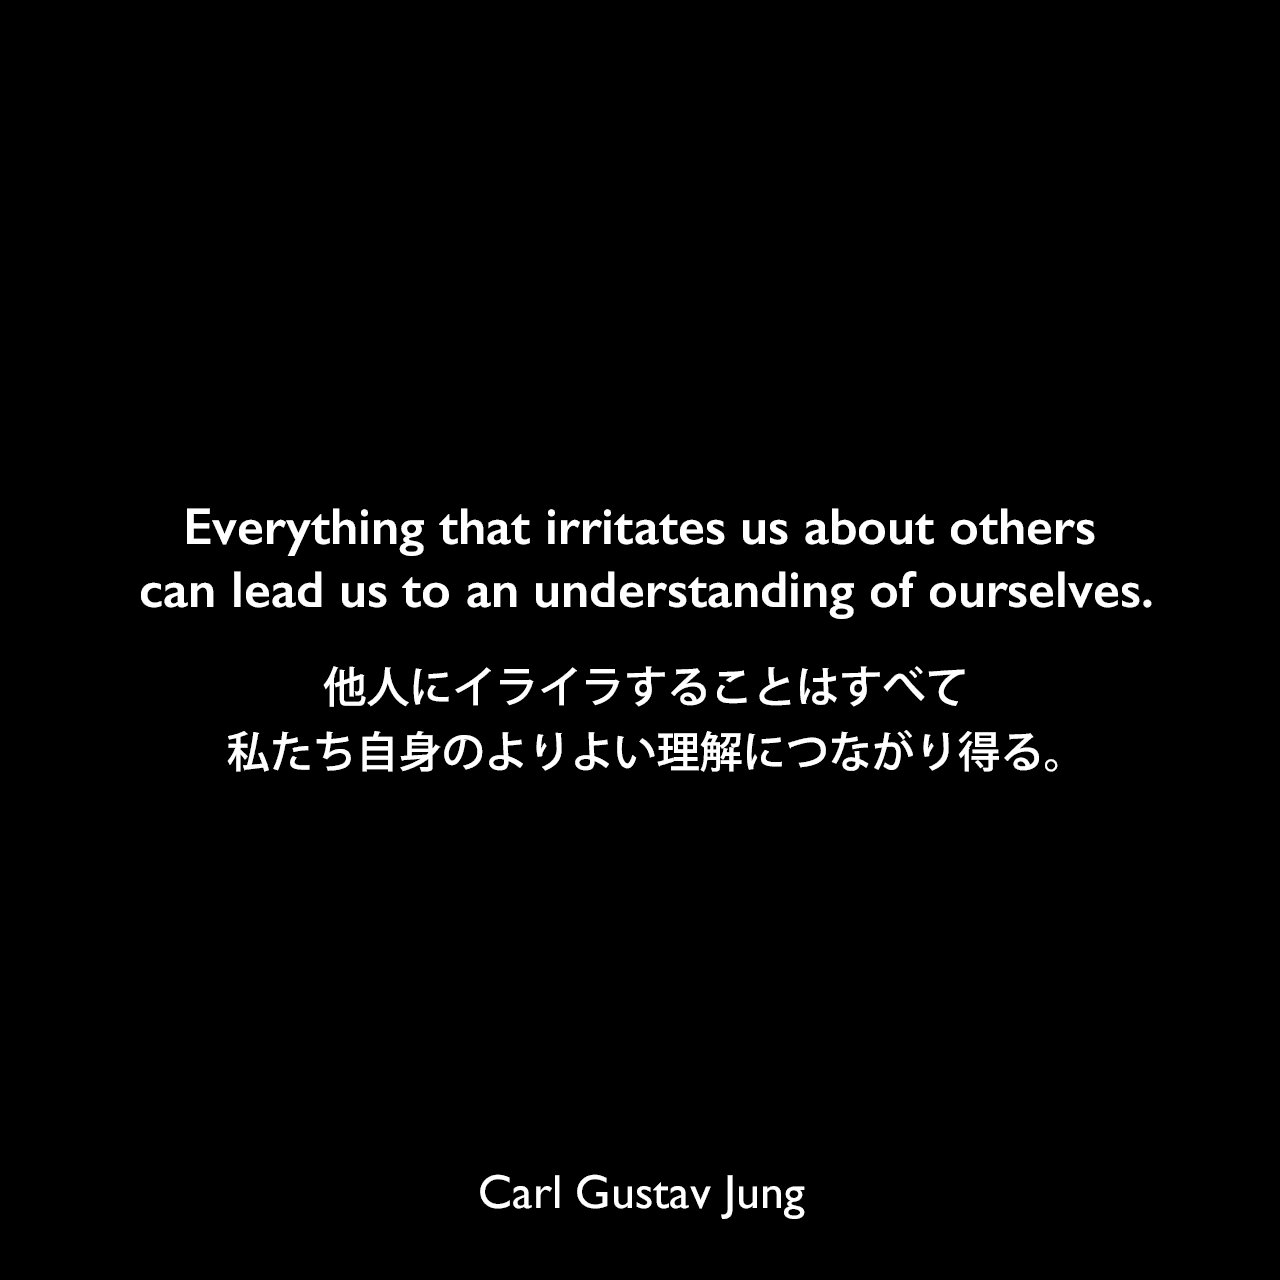 Everything that irritates us about others can lead us to an understanding of ourselves.他人にイライラすることはすべて、私たち自身のよりよい理解につながり得る。